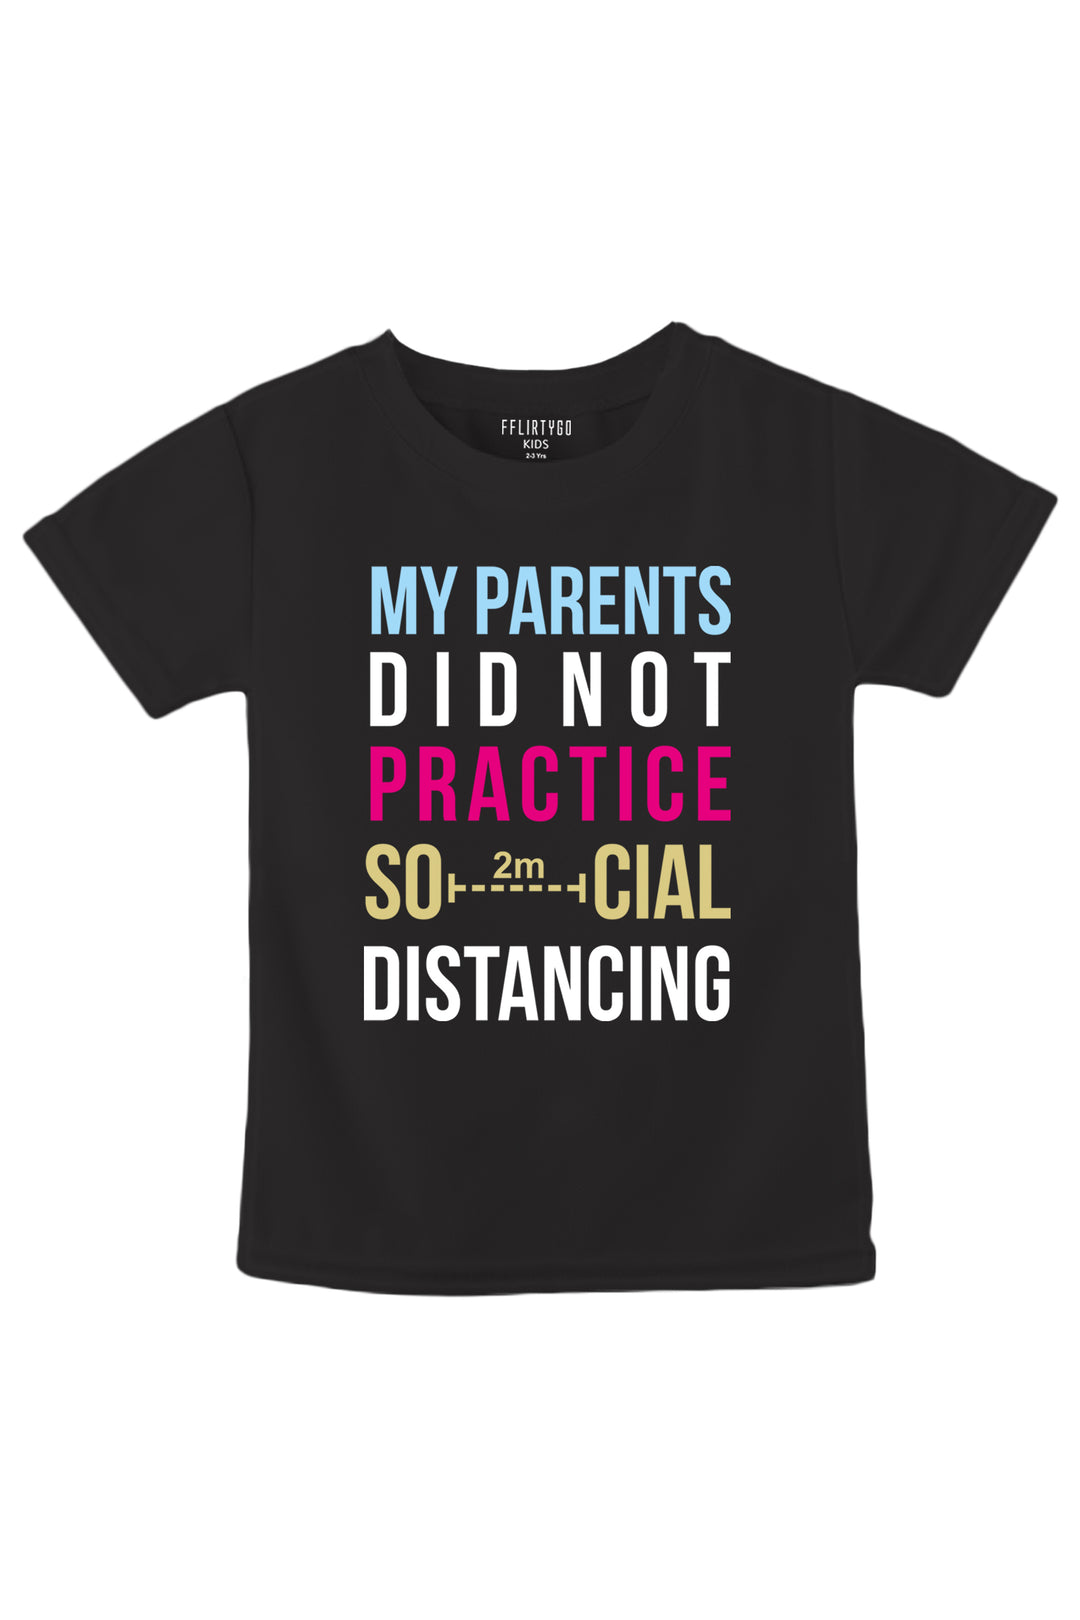 My Parents Did Not Practice Social Distancing